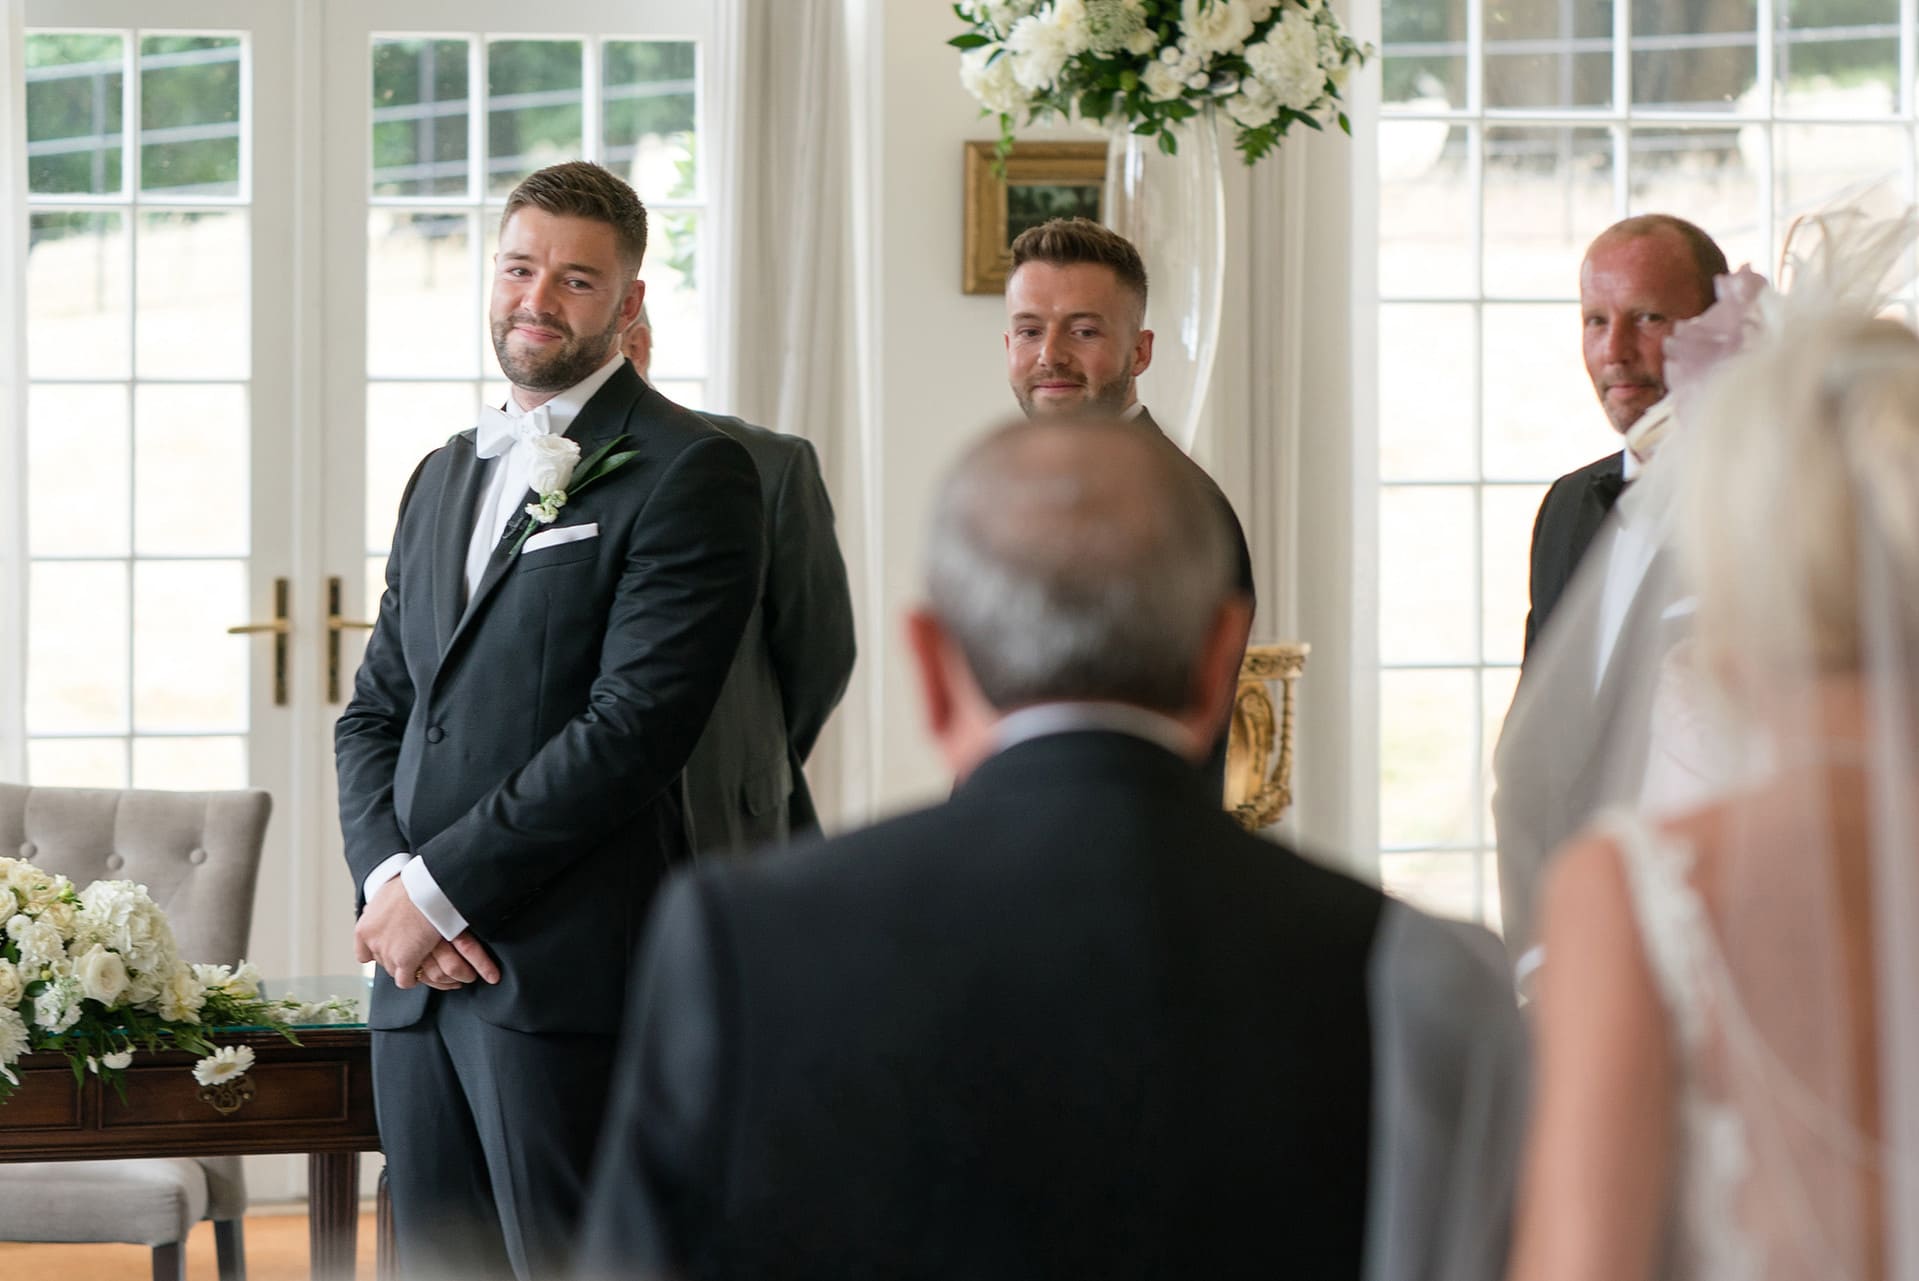 Groom's reaction as he watches bride walk down the aisle